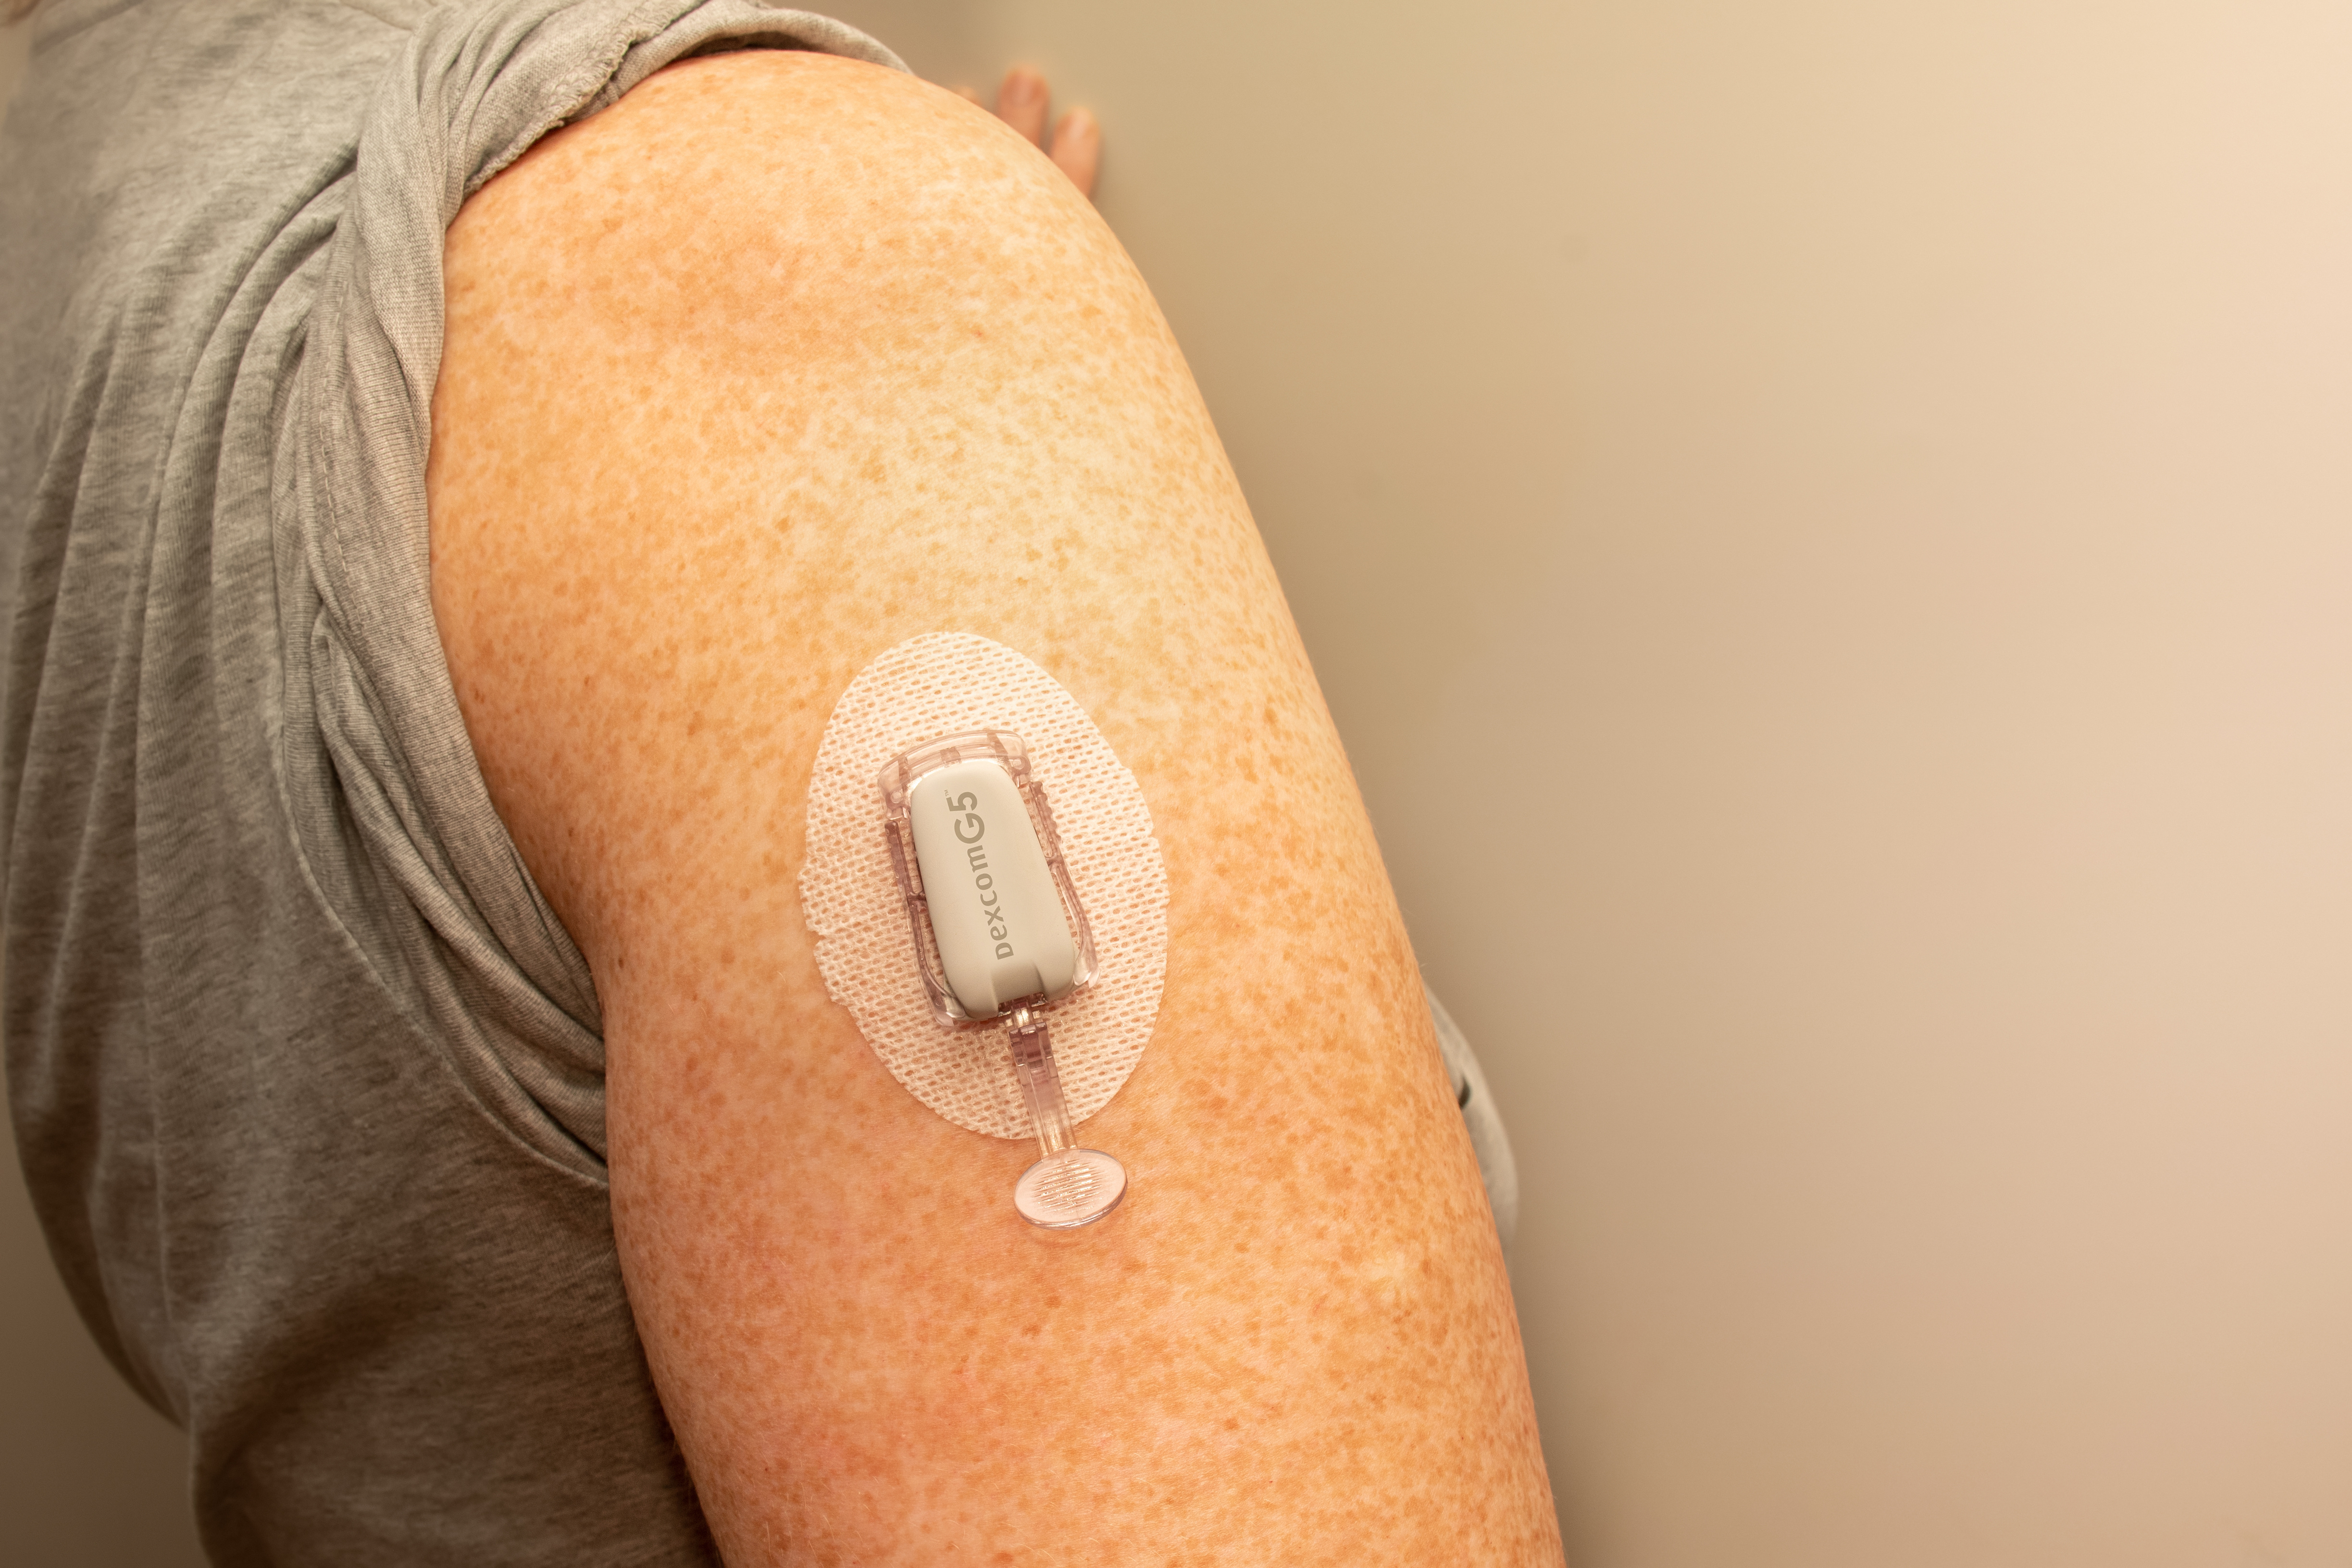 A close up image of an arm with a rolled up grey sleeve to show off their diabetes patch.